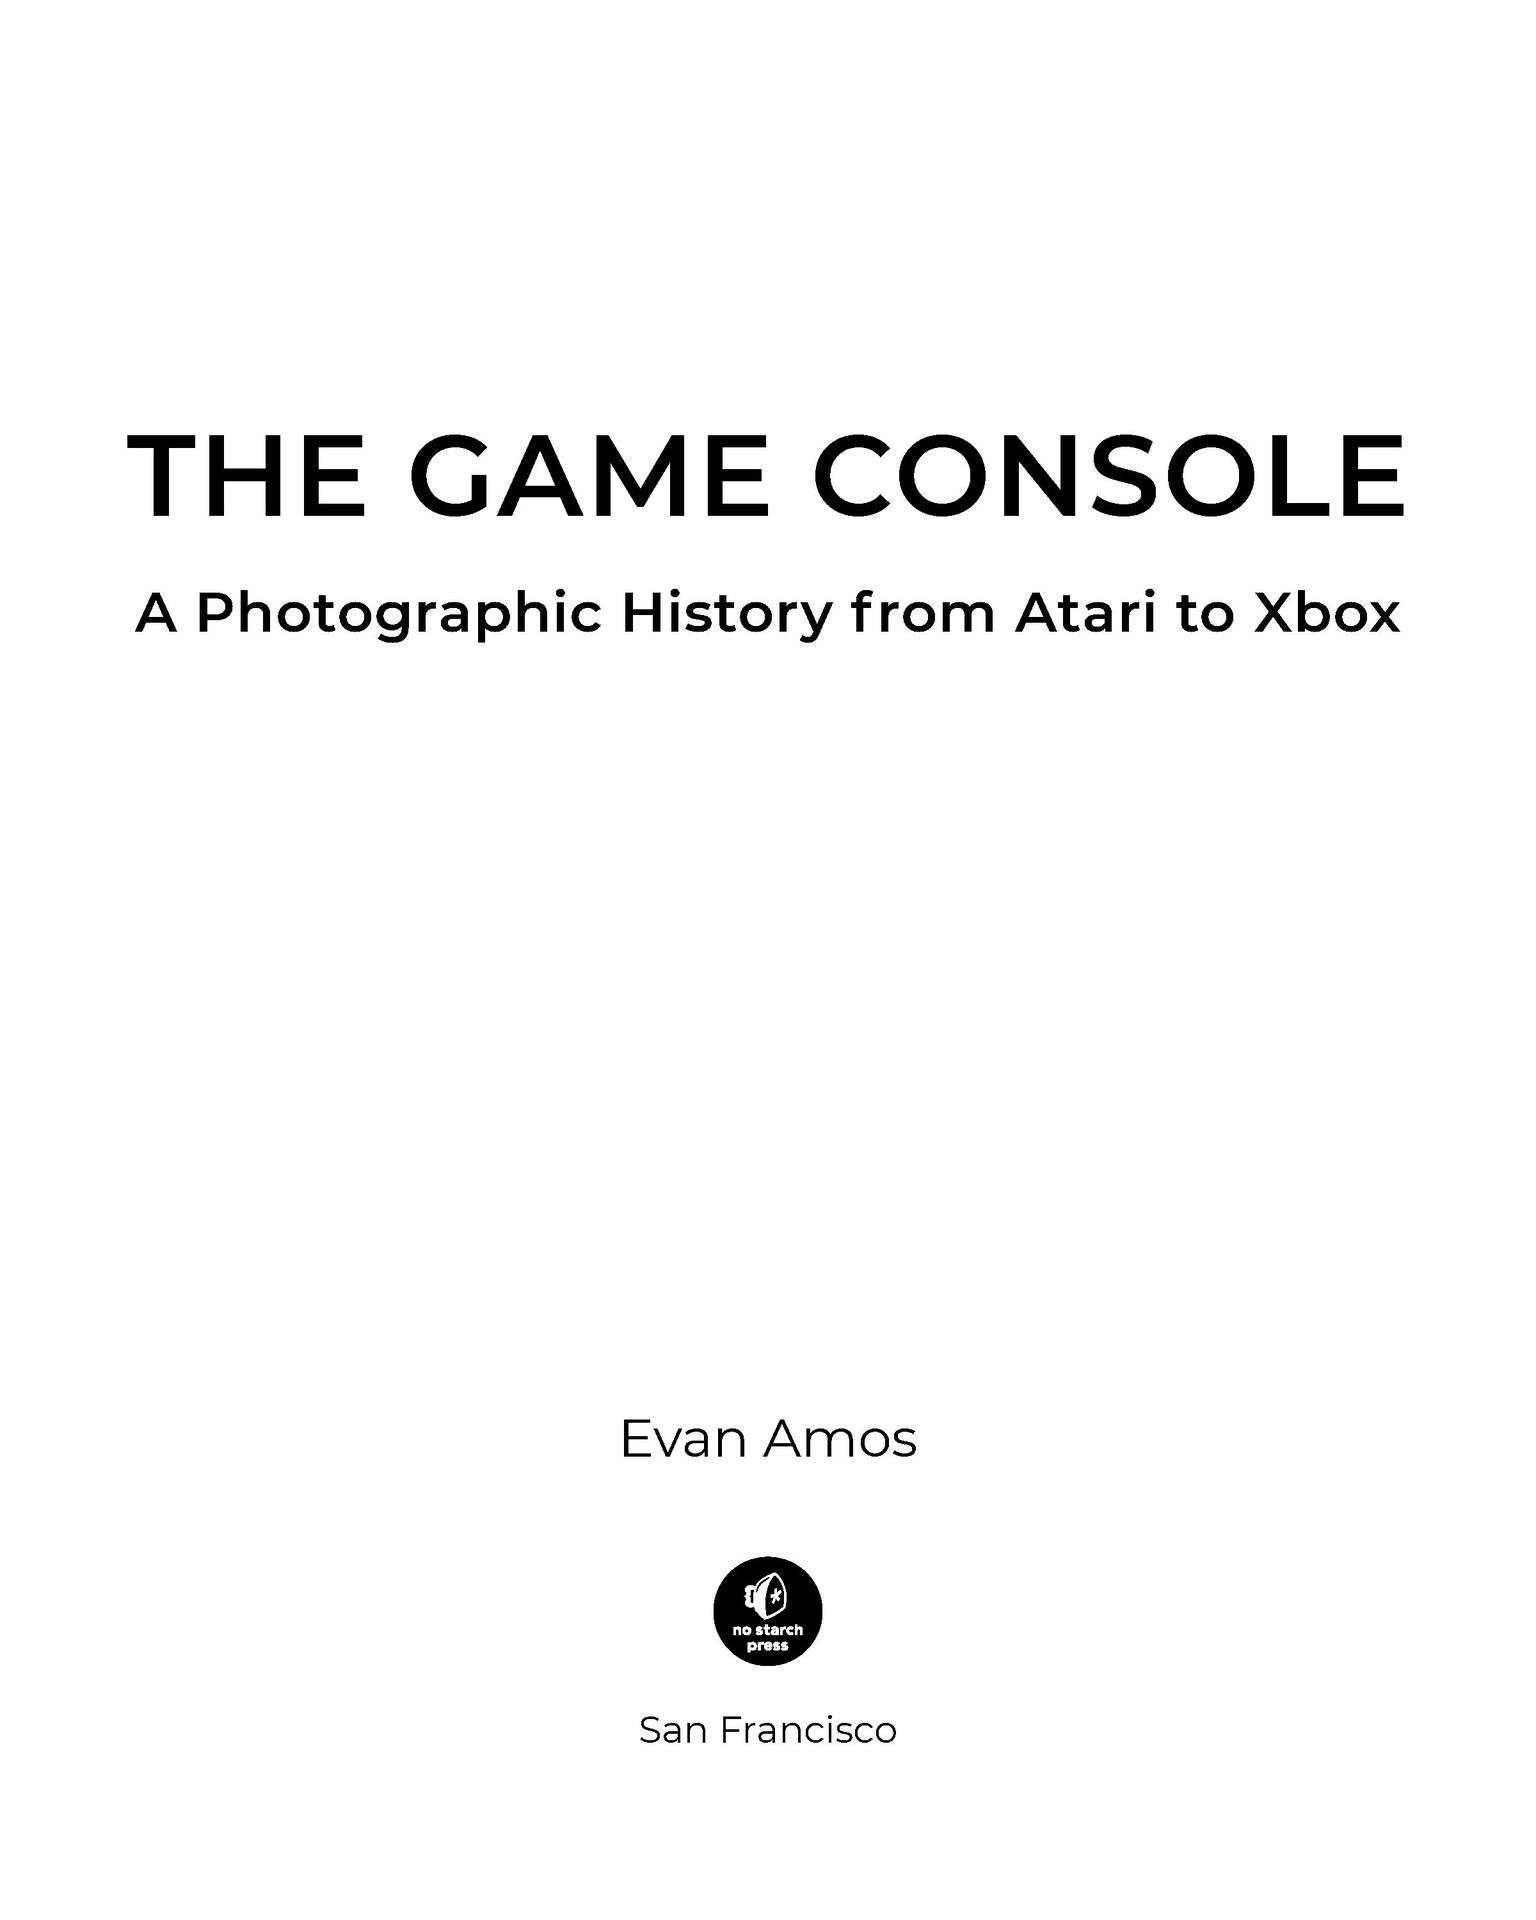 The game console a photographic history from Atari to Xbox - photo 4